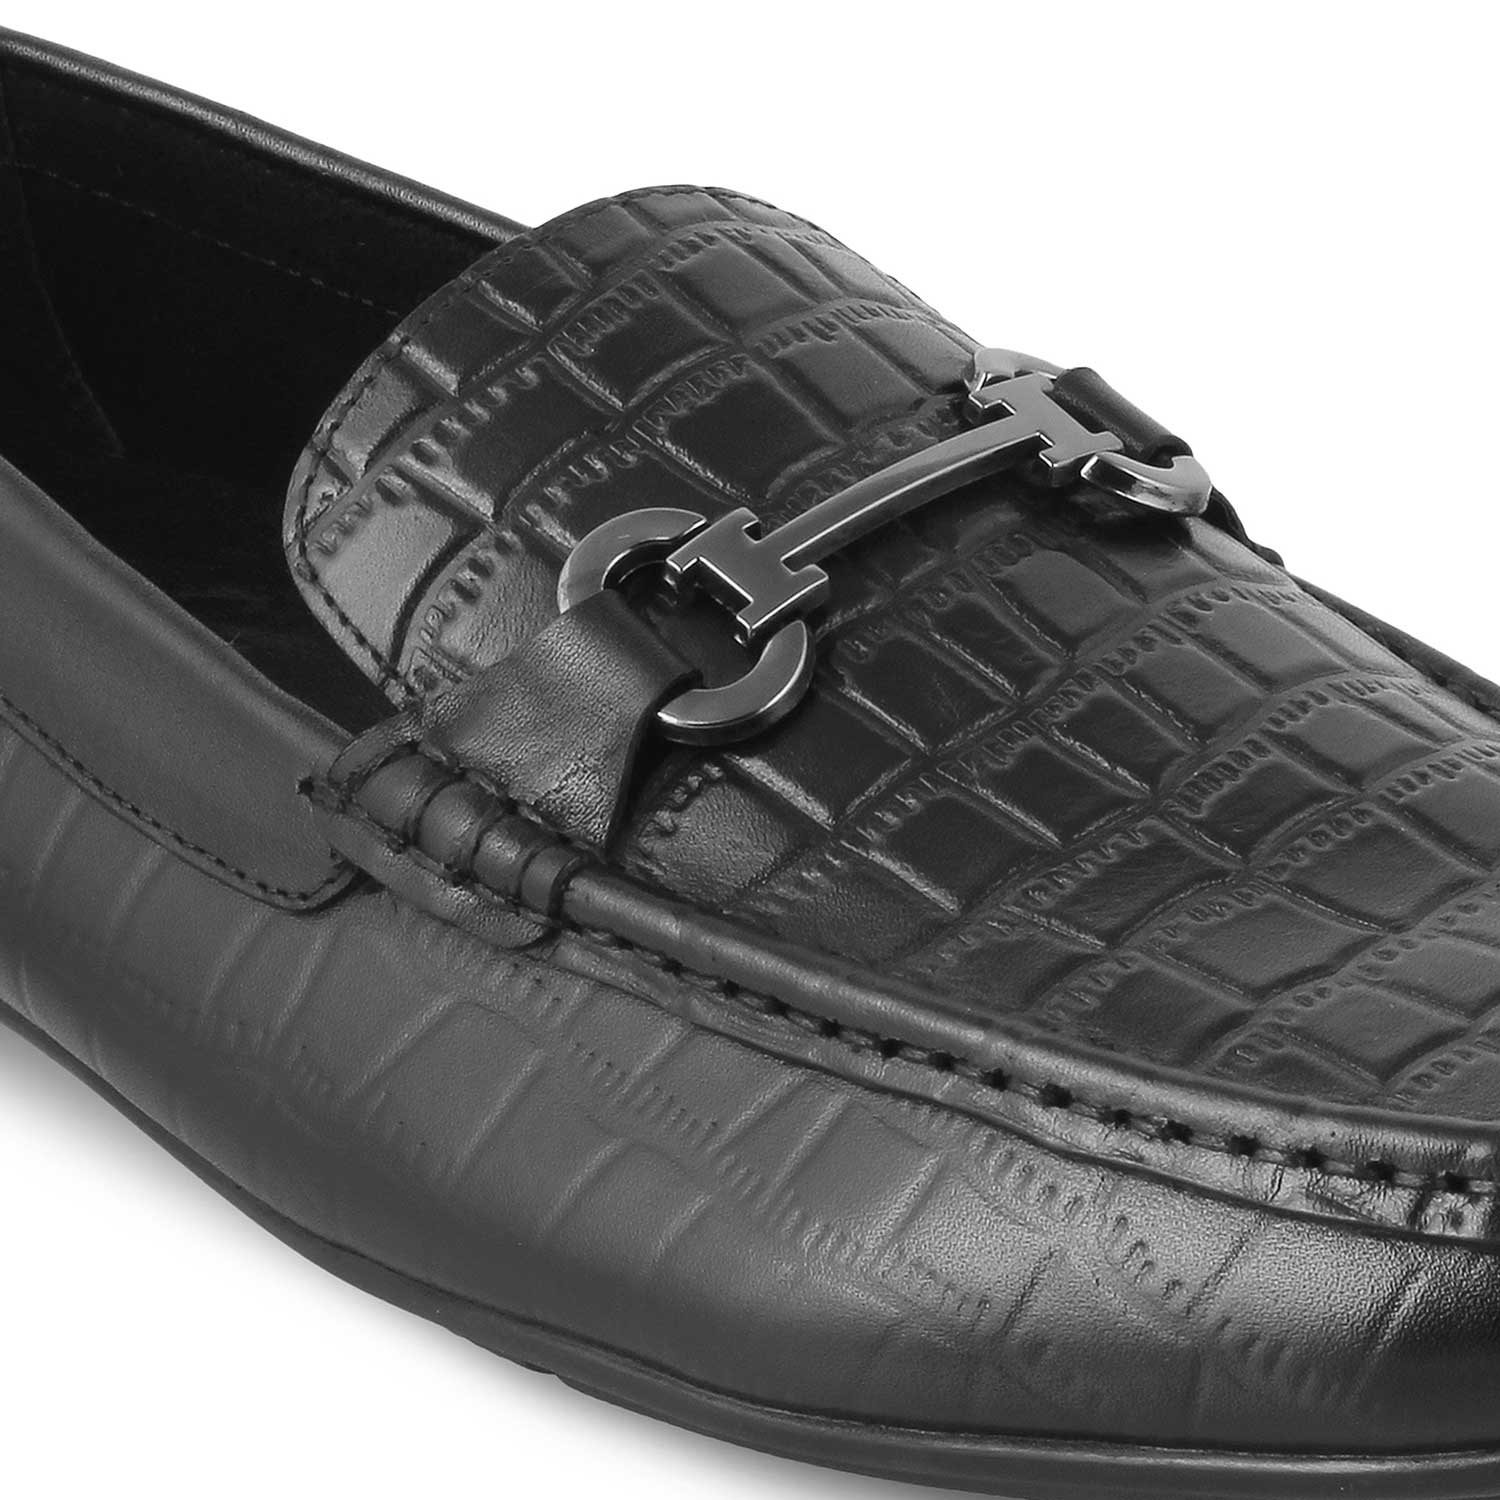 Tresmode-The Yoxile Black Men's Leather Driving Loafers Tresmode-Tresmode